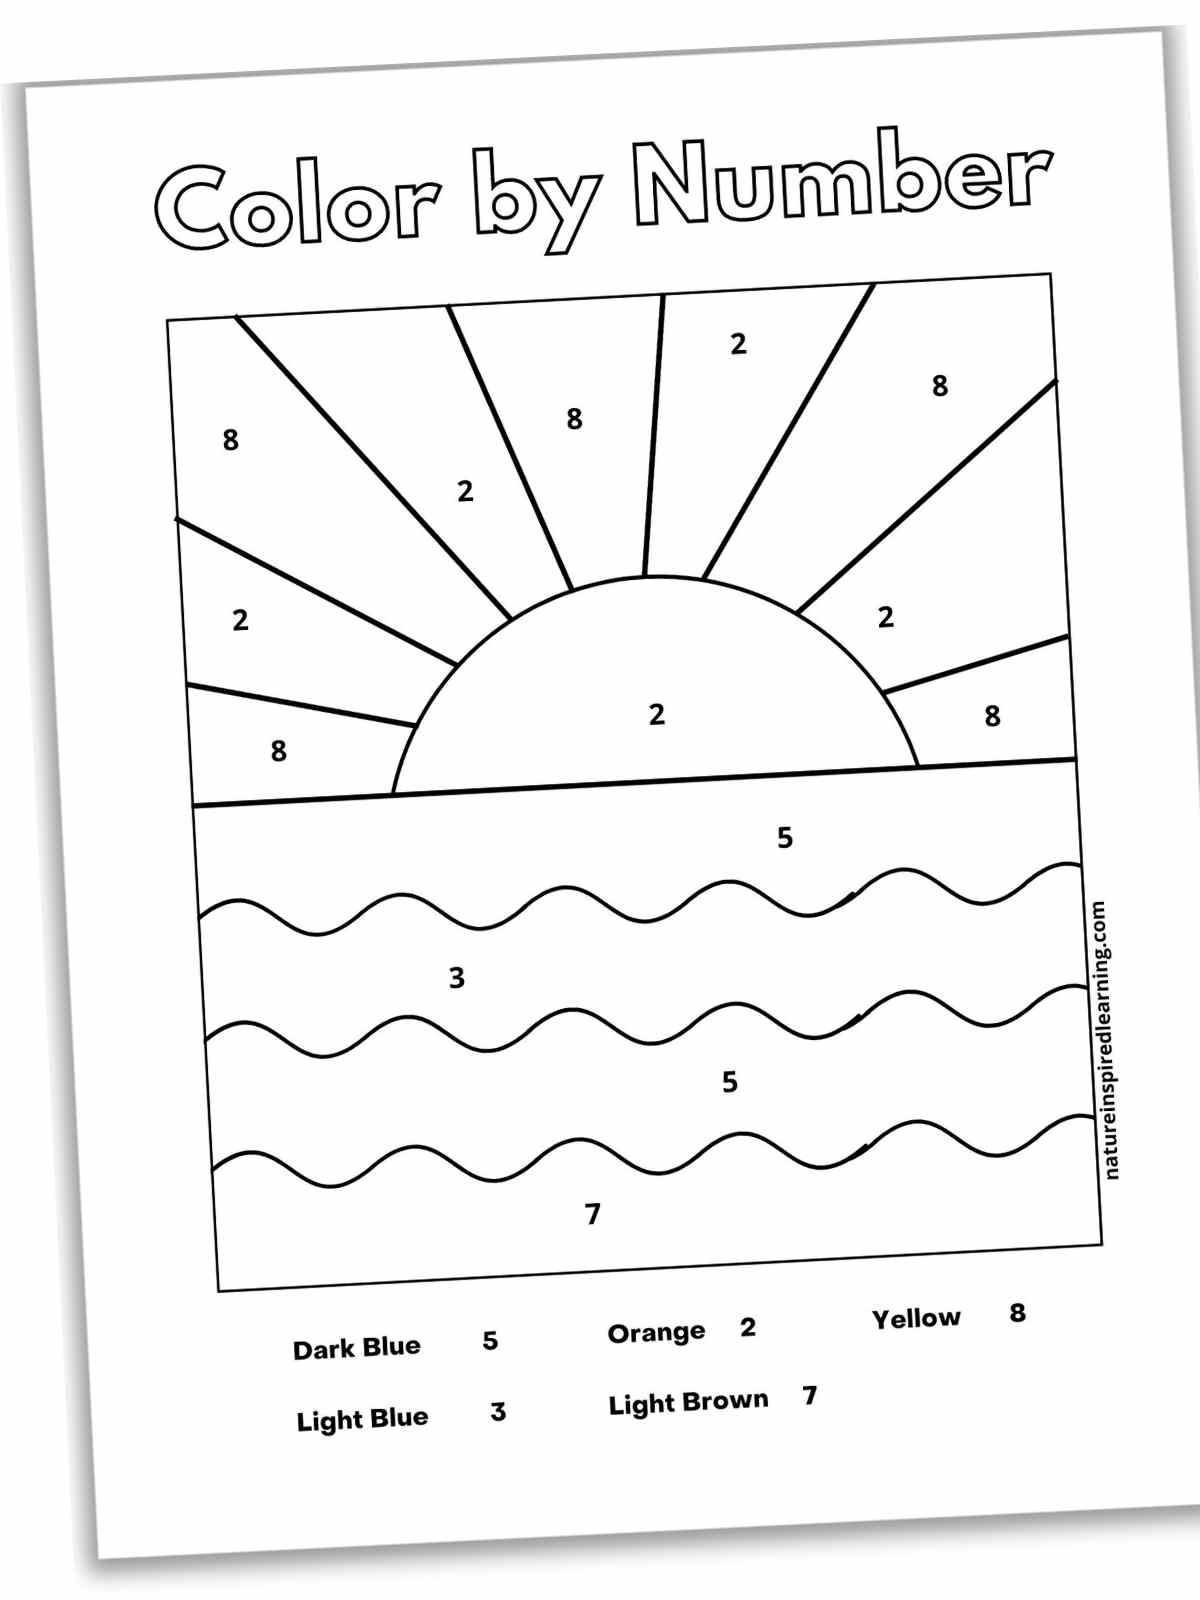 black and white sun with rays and waves with numbers within the image with a color key below slanted with a drop shadow.